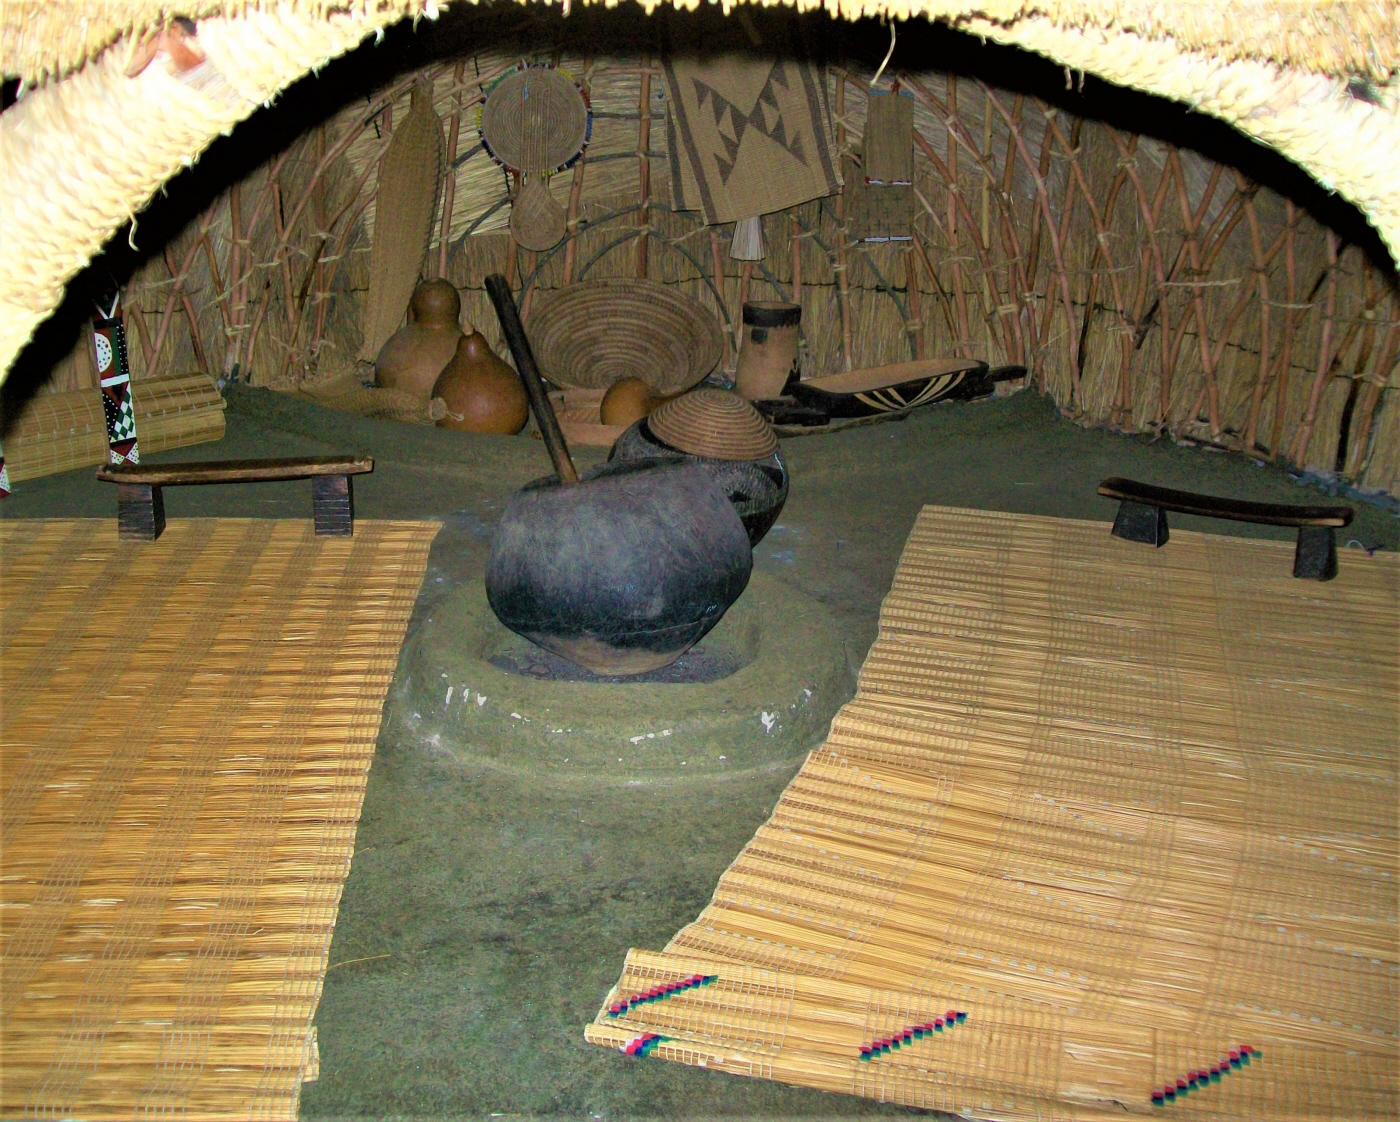 Traditional Umuzi (Zulu Home) such as King Shaka lived in